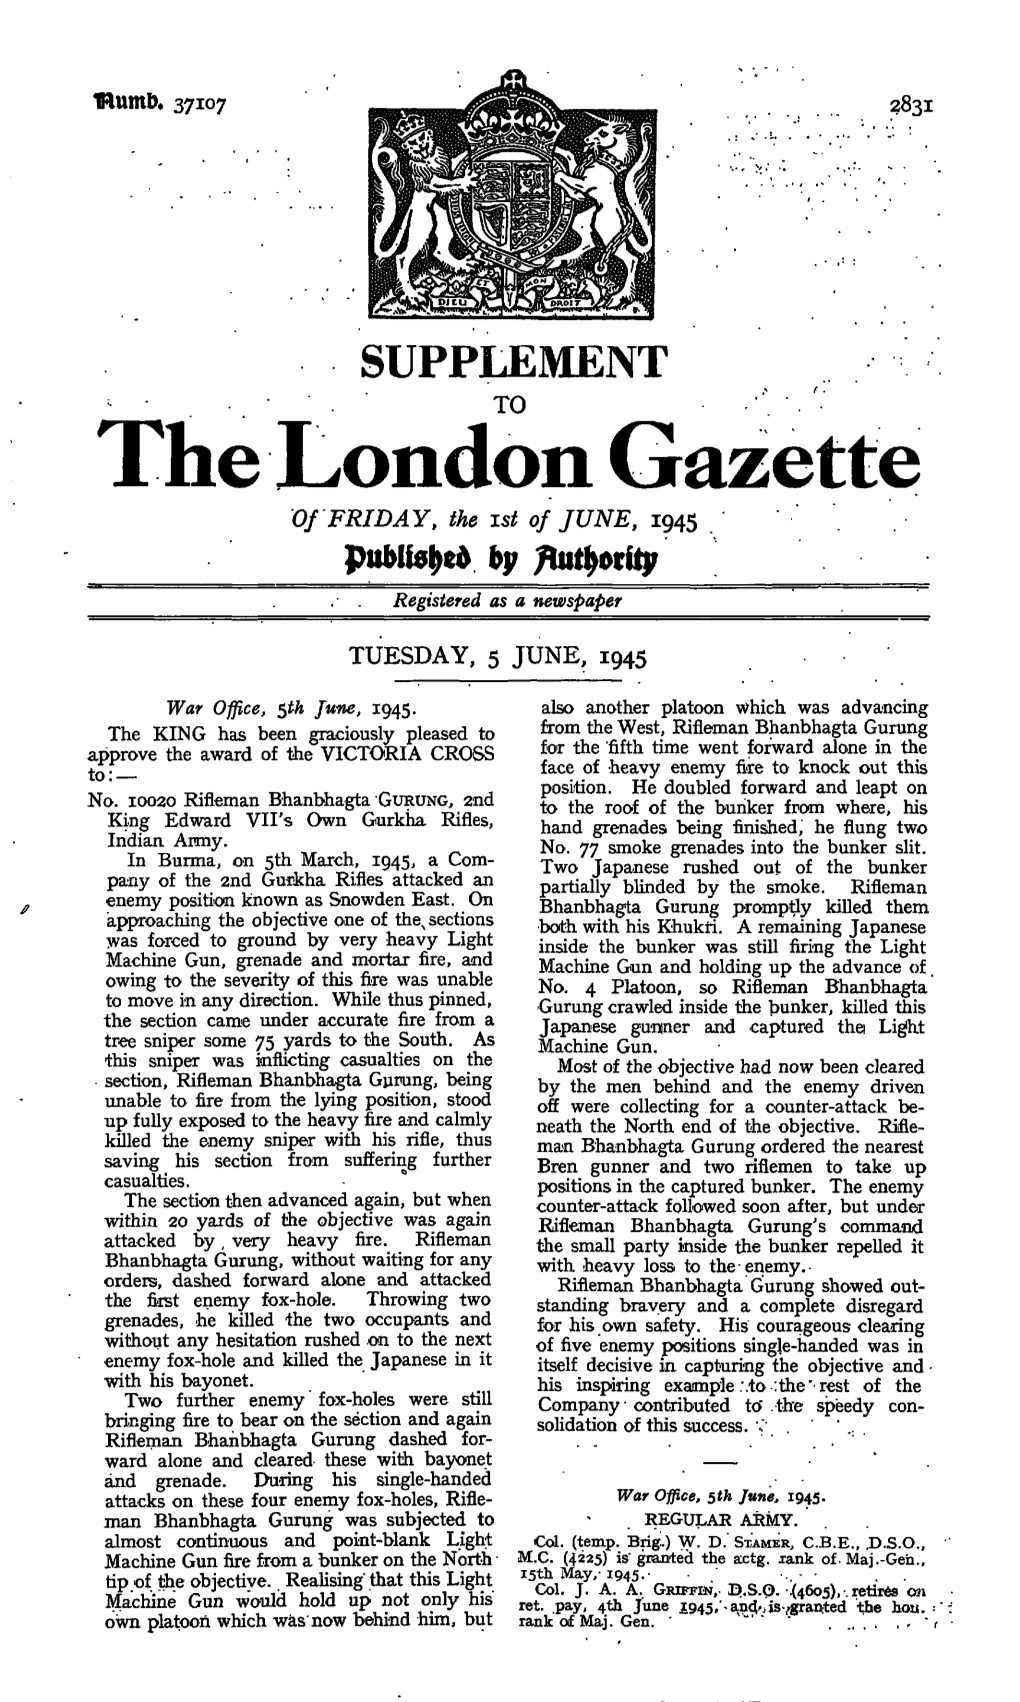 The London Gazette of FRIDAY, the Ist of JUNE, 1945 by Registered As a Newspaper